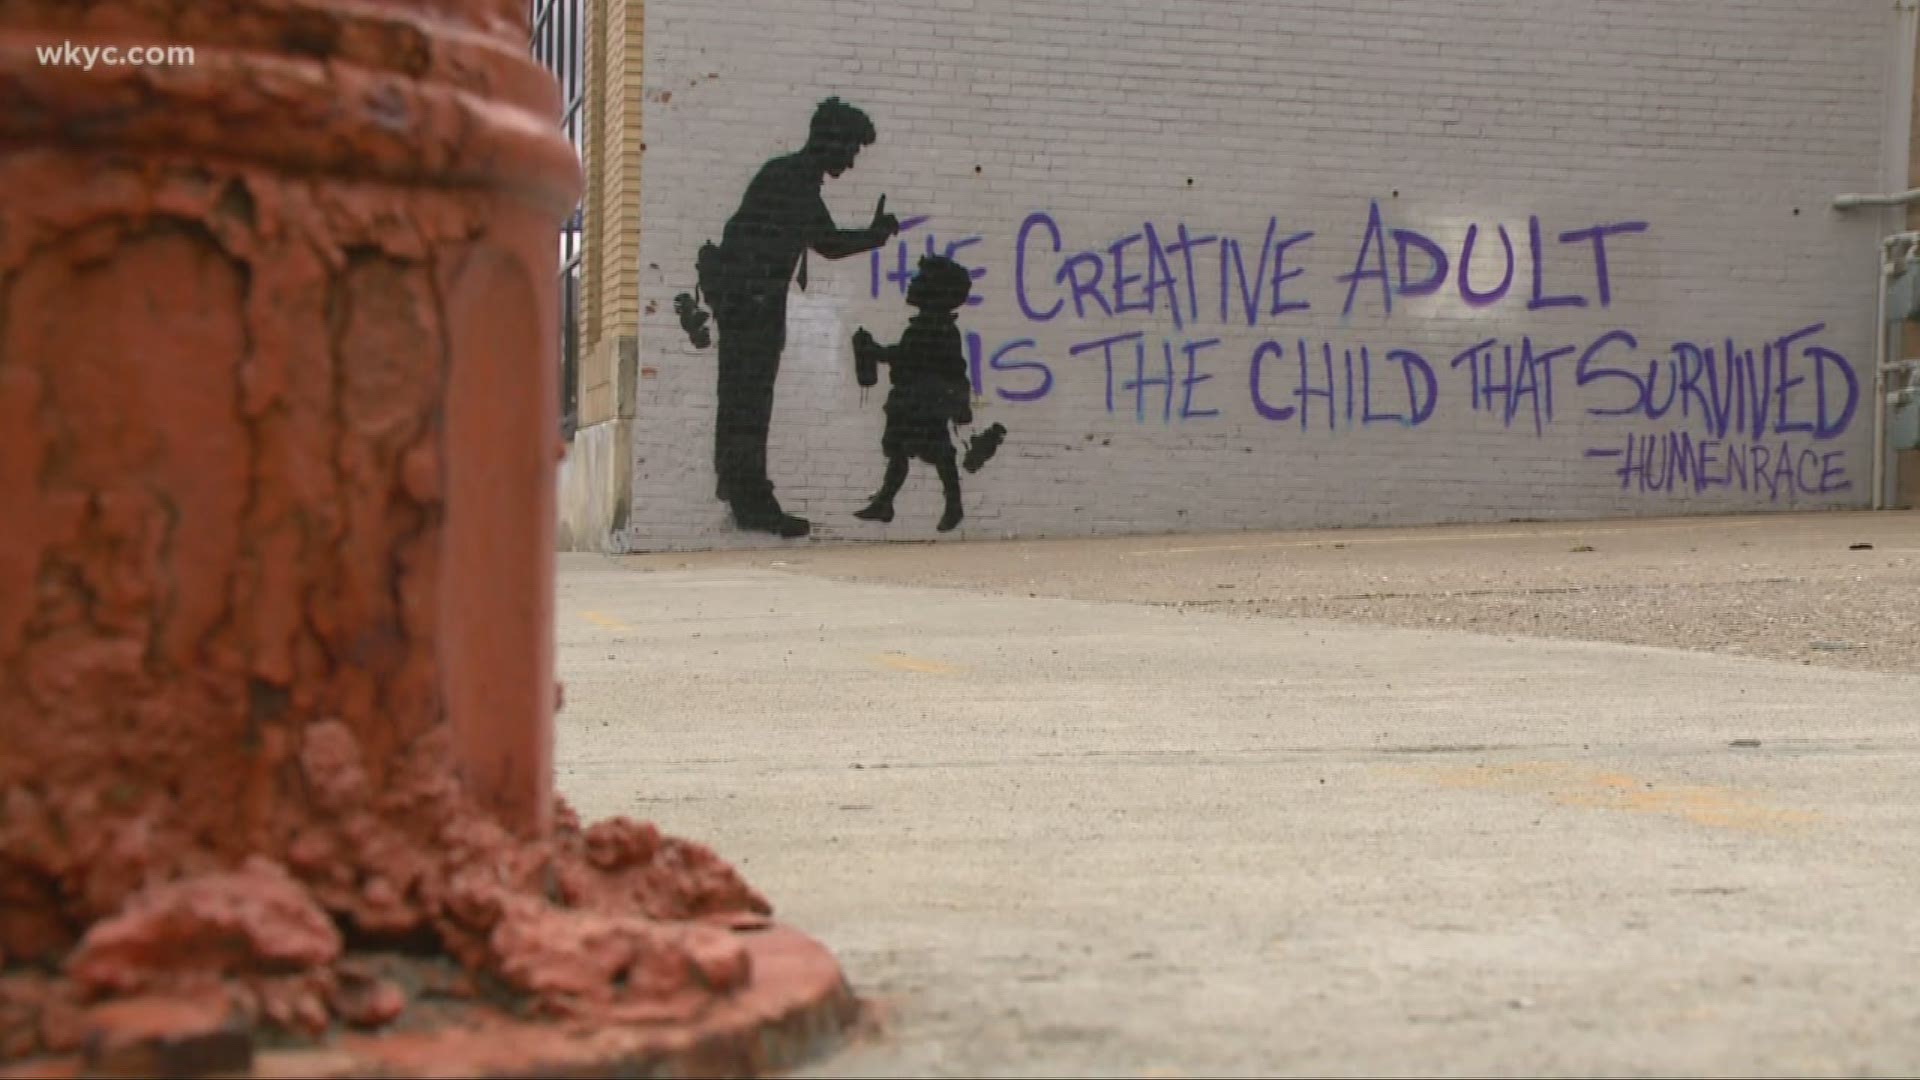 Work of local graffiti artist keeps popping up overnight. Andrew Horansky reports.